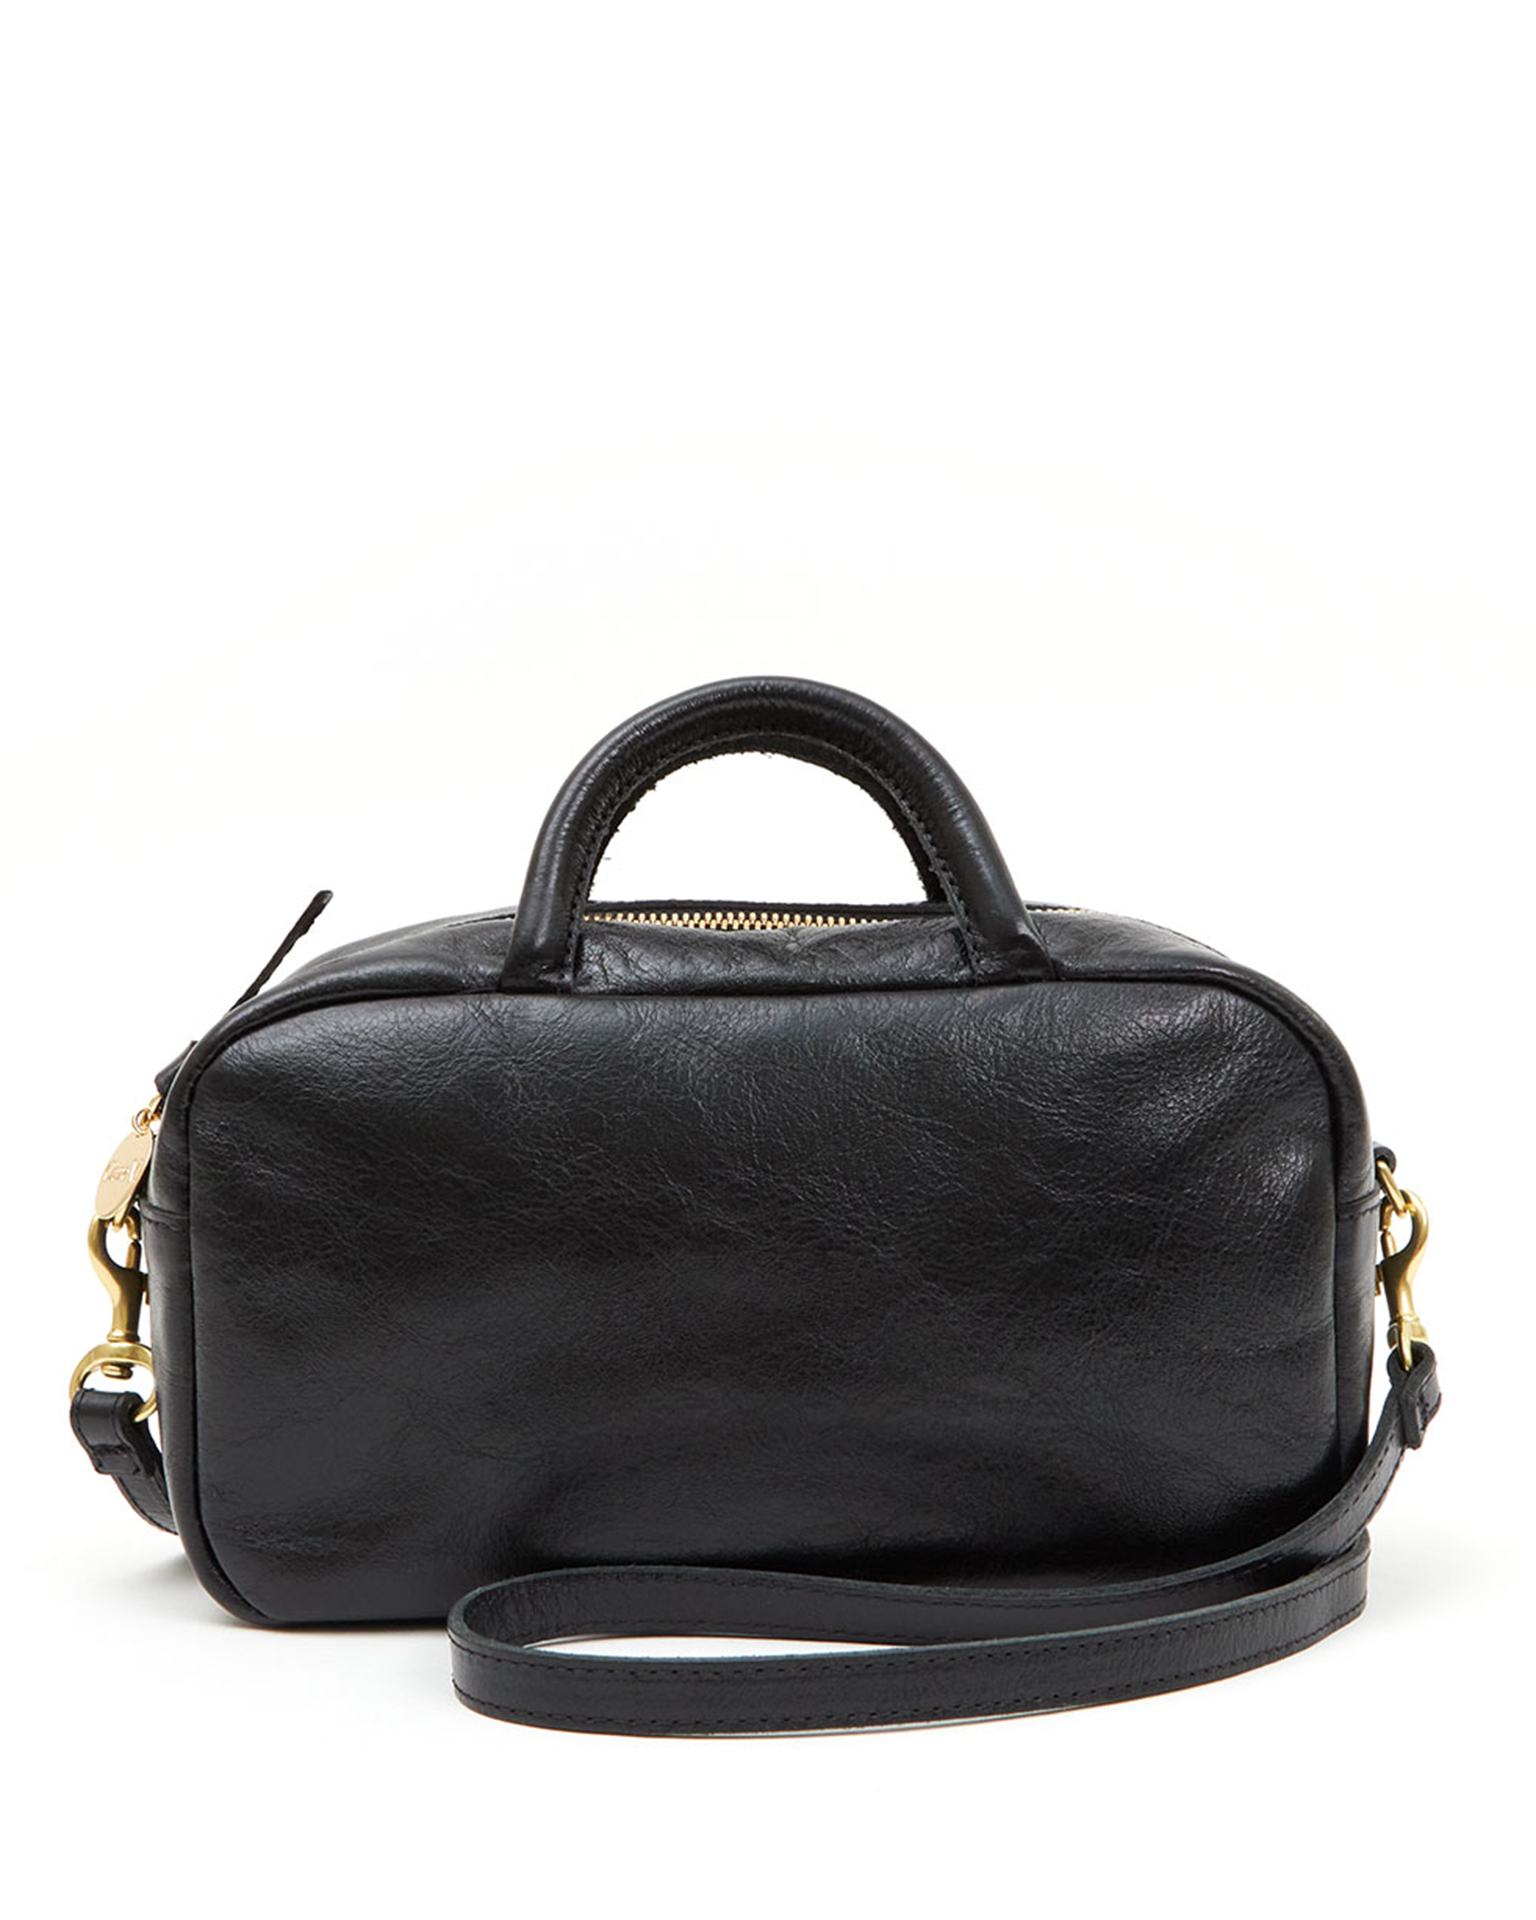 Clare V. Faux Leather Handbags